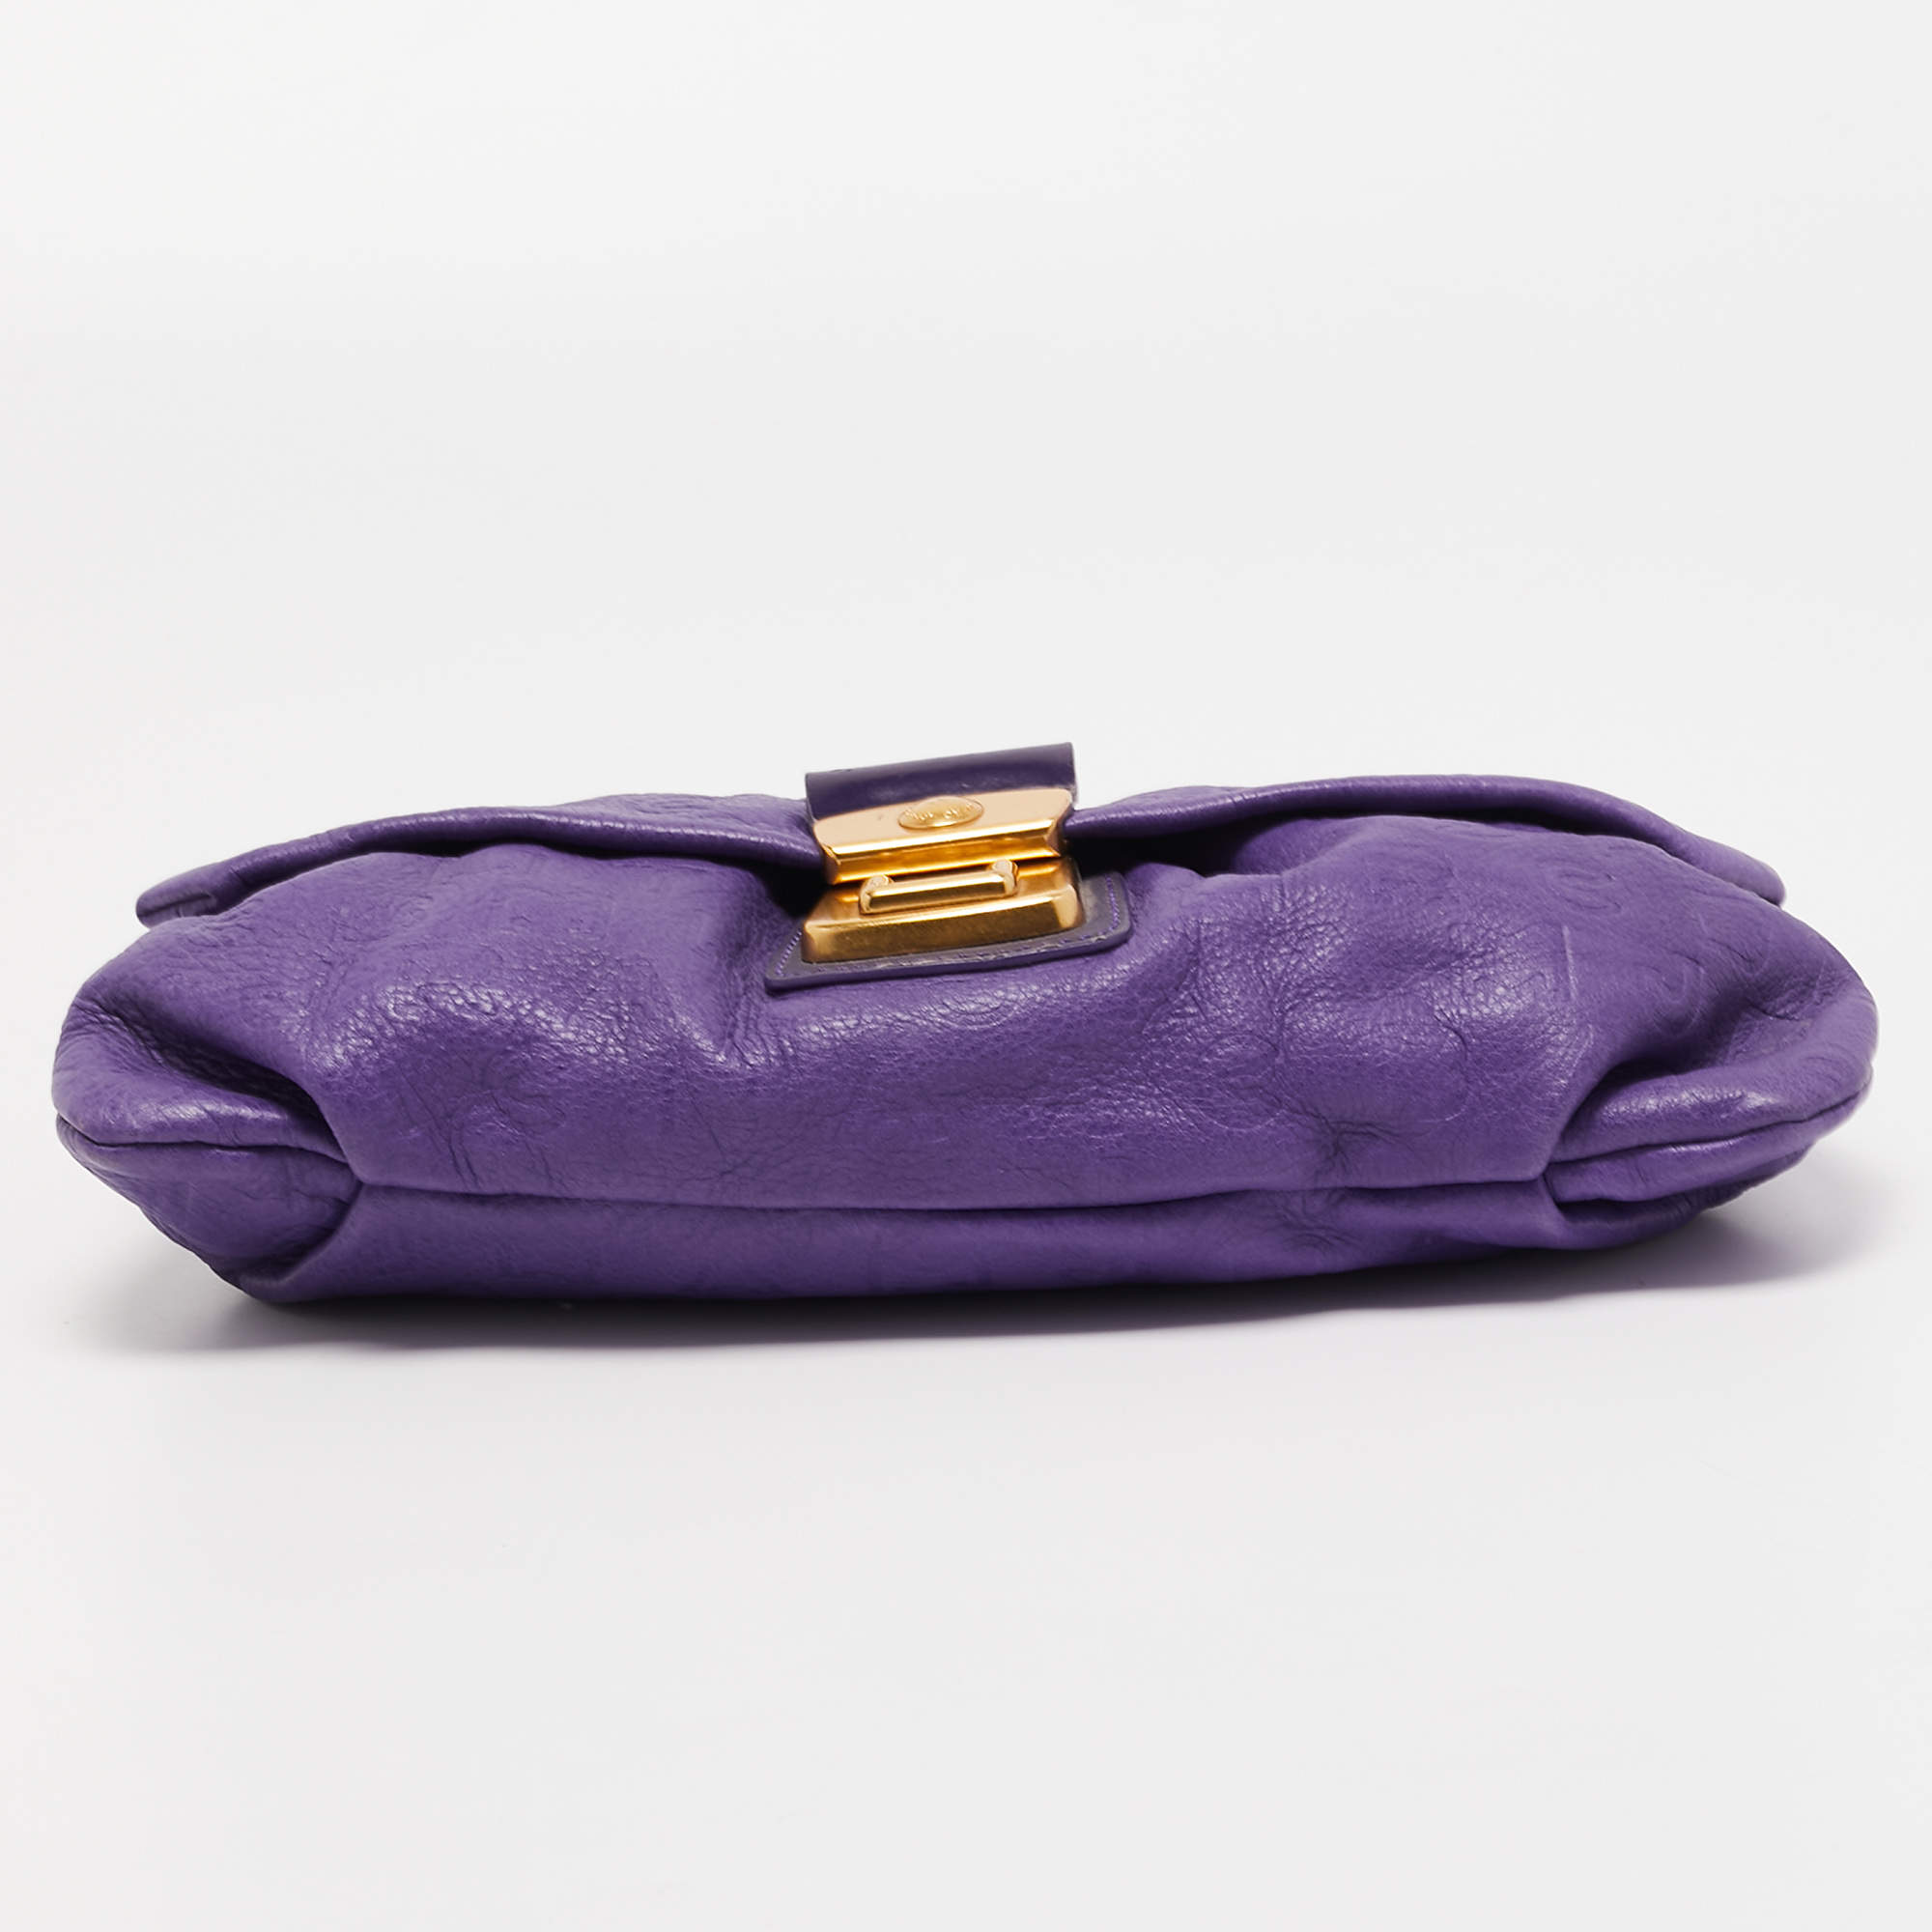 Leather clutch bag Marc by Marc Jacobs Purple in Leather - 18522500